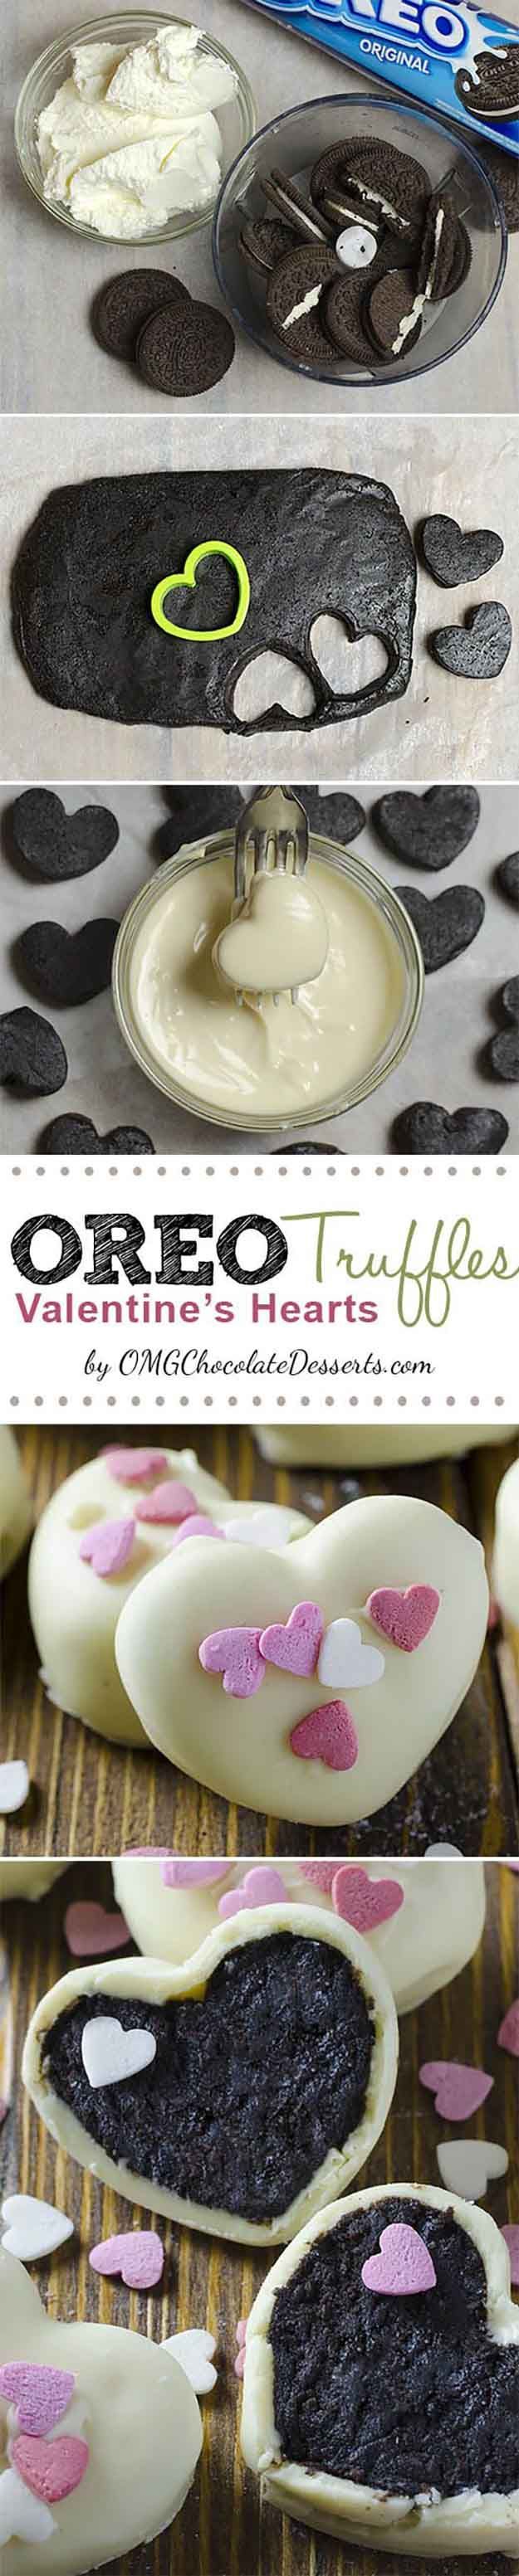 Oreo Truffle Valentines Hearts | 25 Valentines Day Treats That Look Way Too Good to Eat | Beautiful Homemade Gifts For Your Love